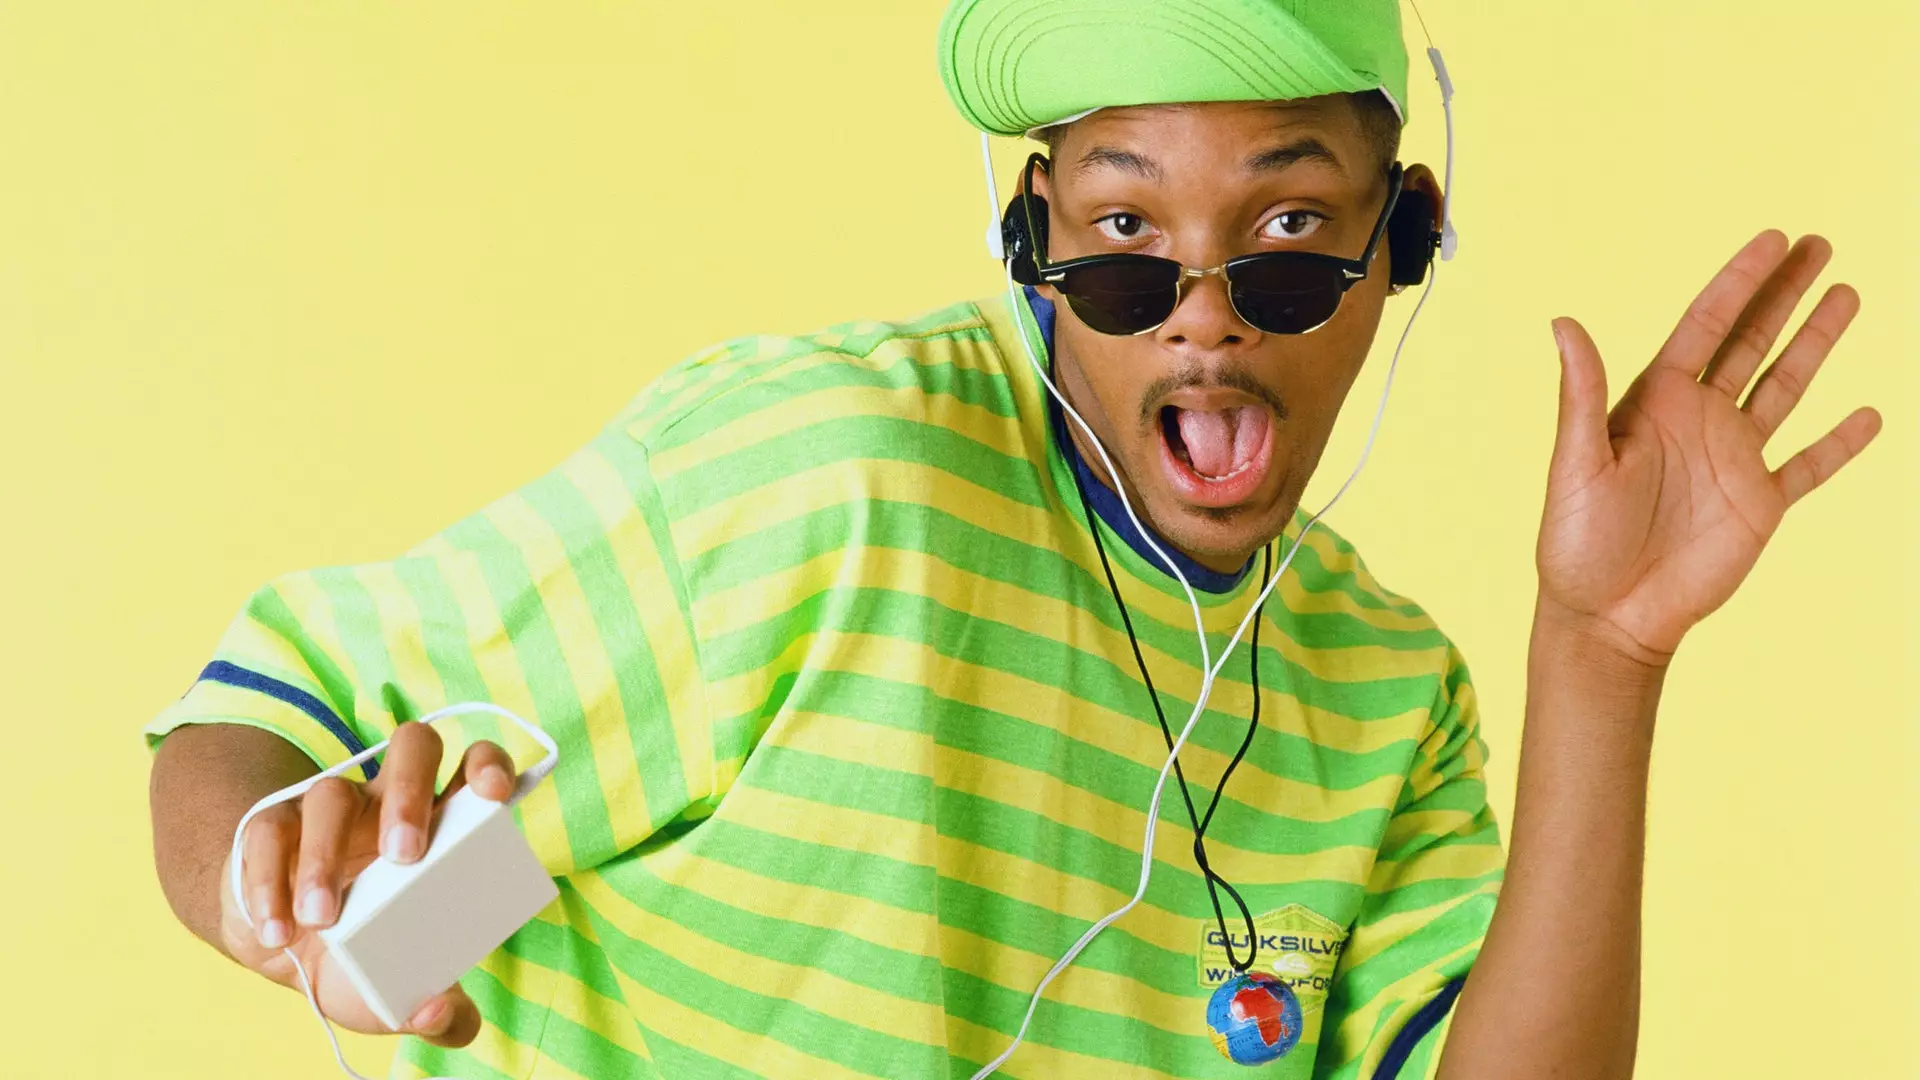 The Fresh Prince of Bel-Air was one of Will Smith's first acting roles (